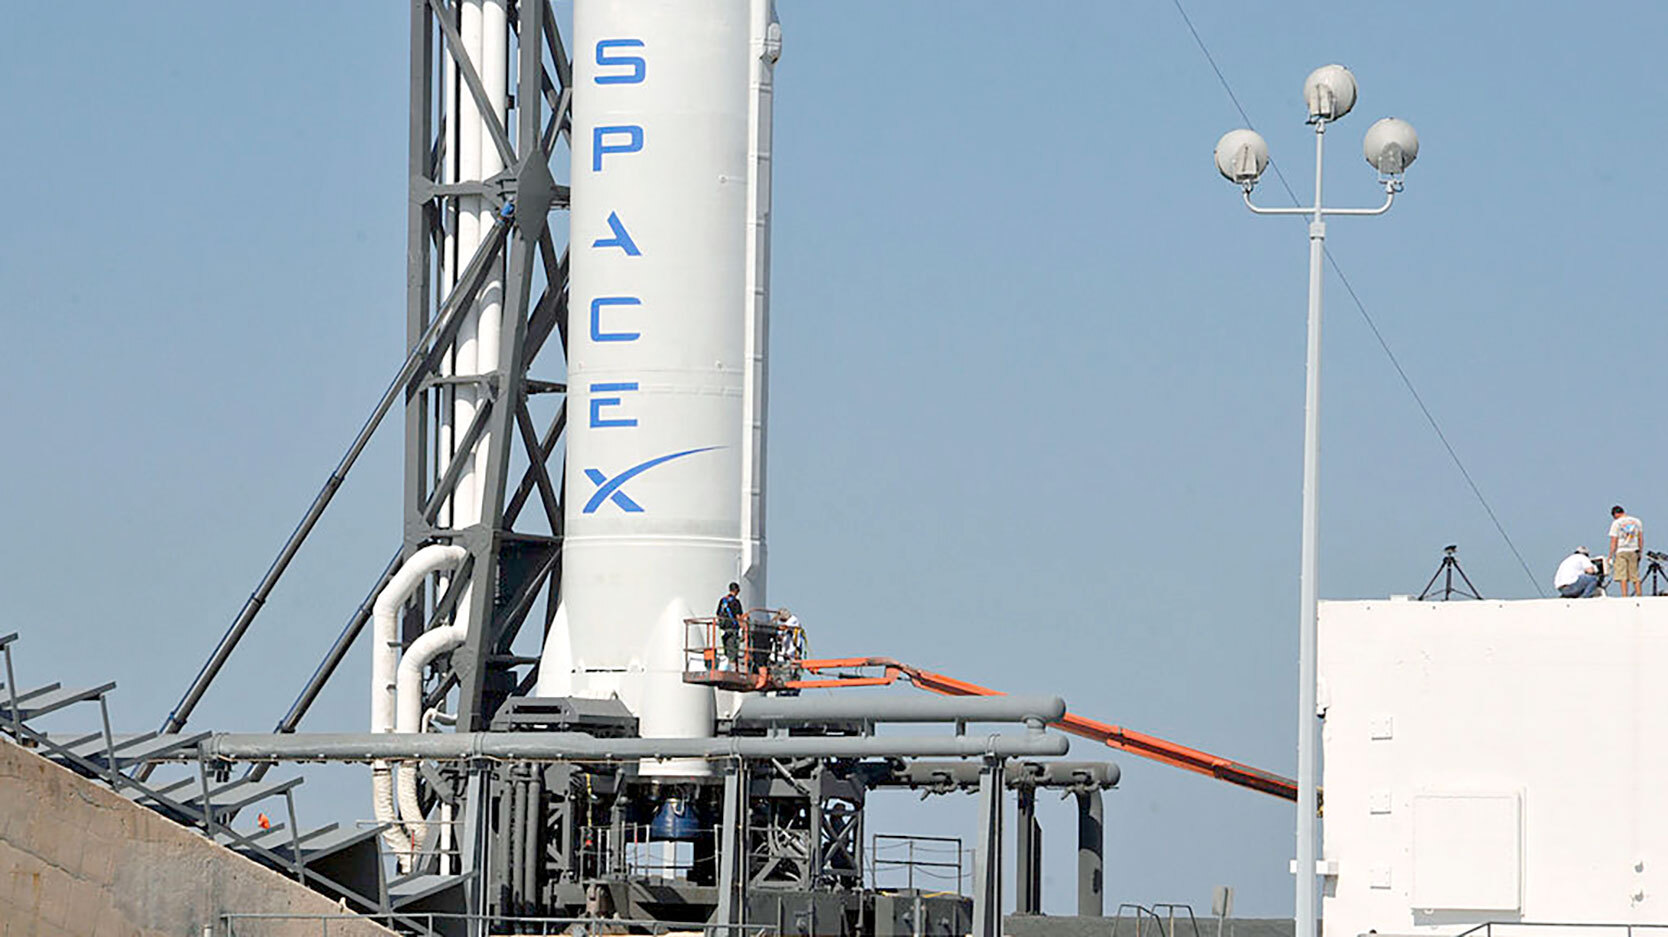 SpaceX's Falcon 9 spacecraft with Dragon reusable capsule